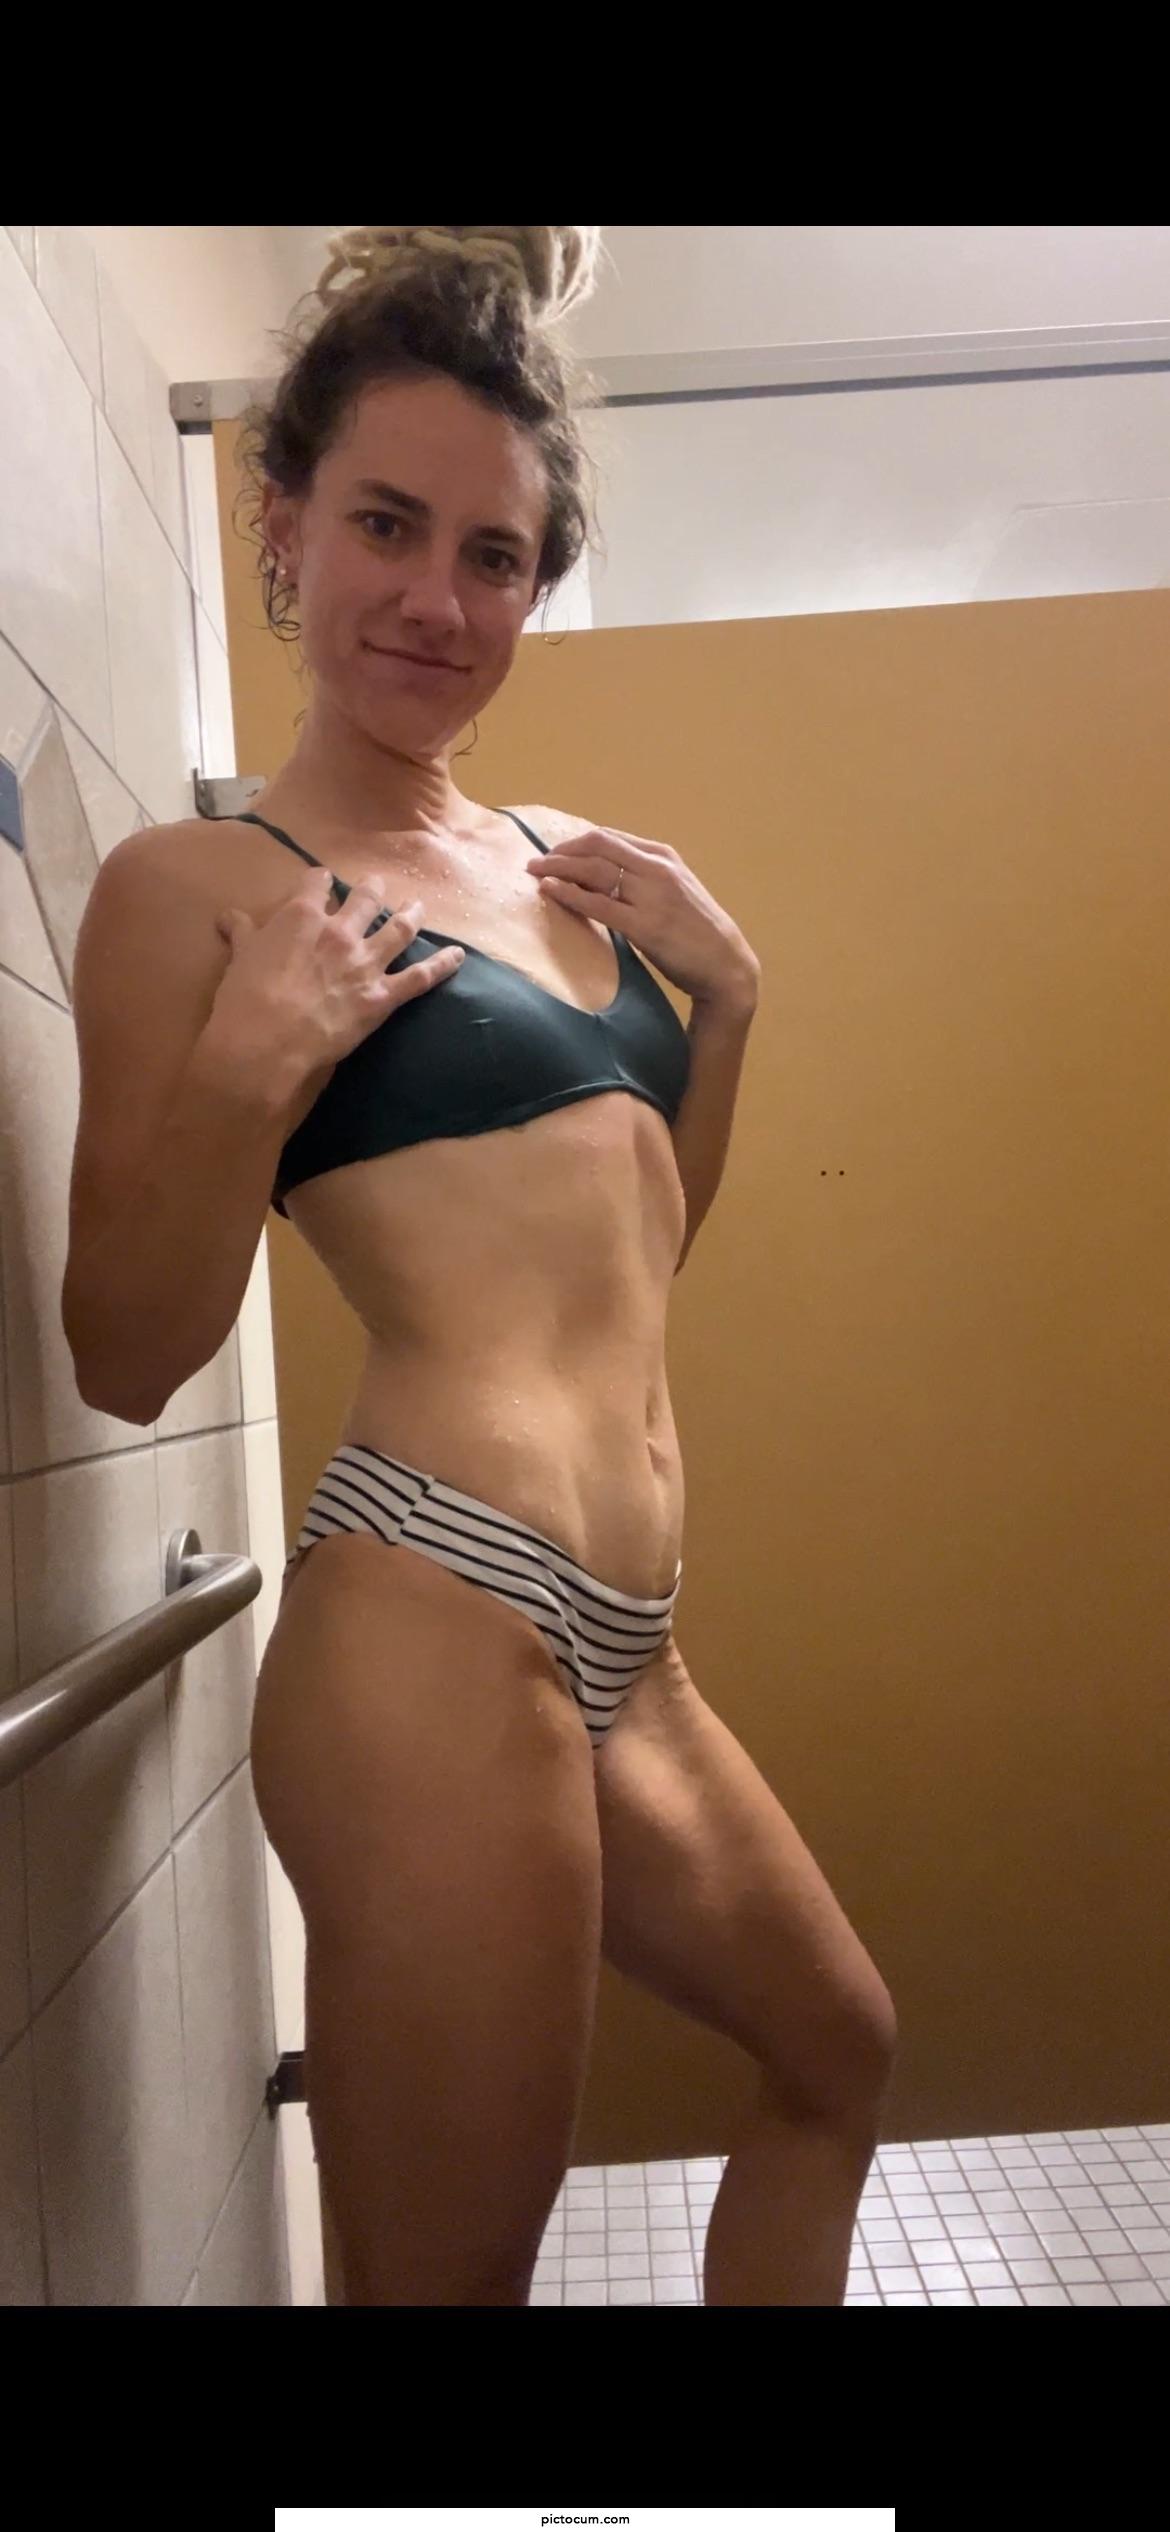 Bikini for the dads at family swim time